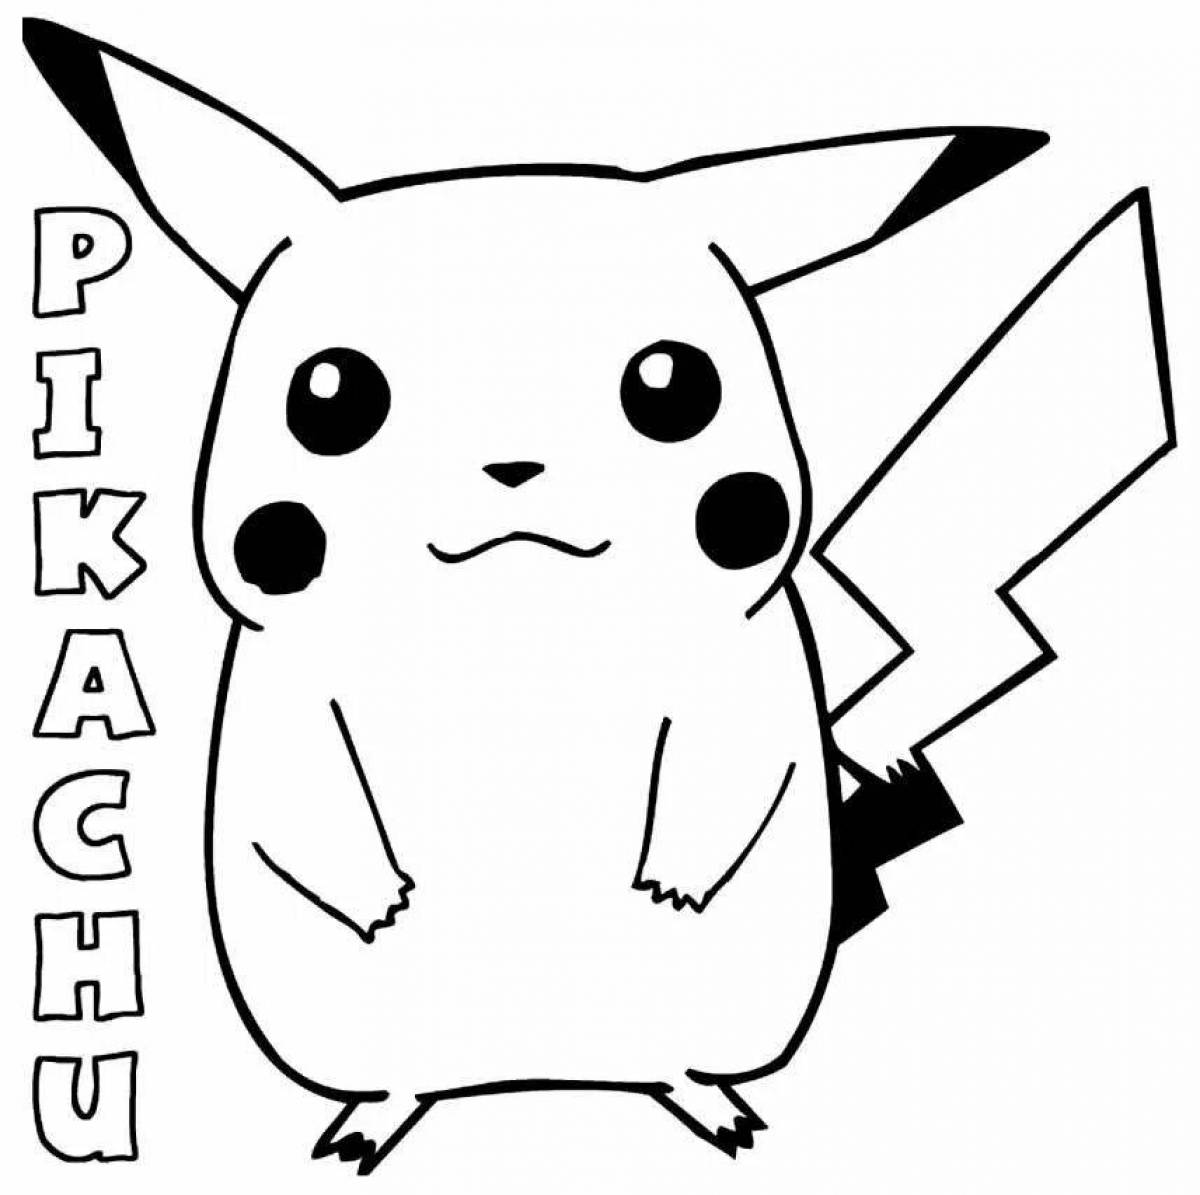 Naughty pikachu coloring page